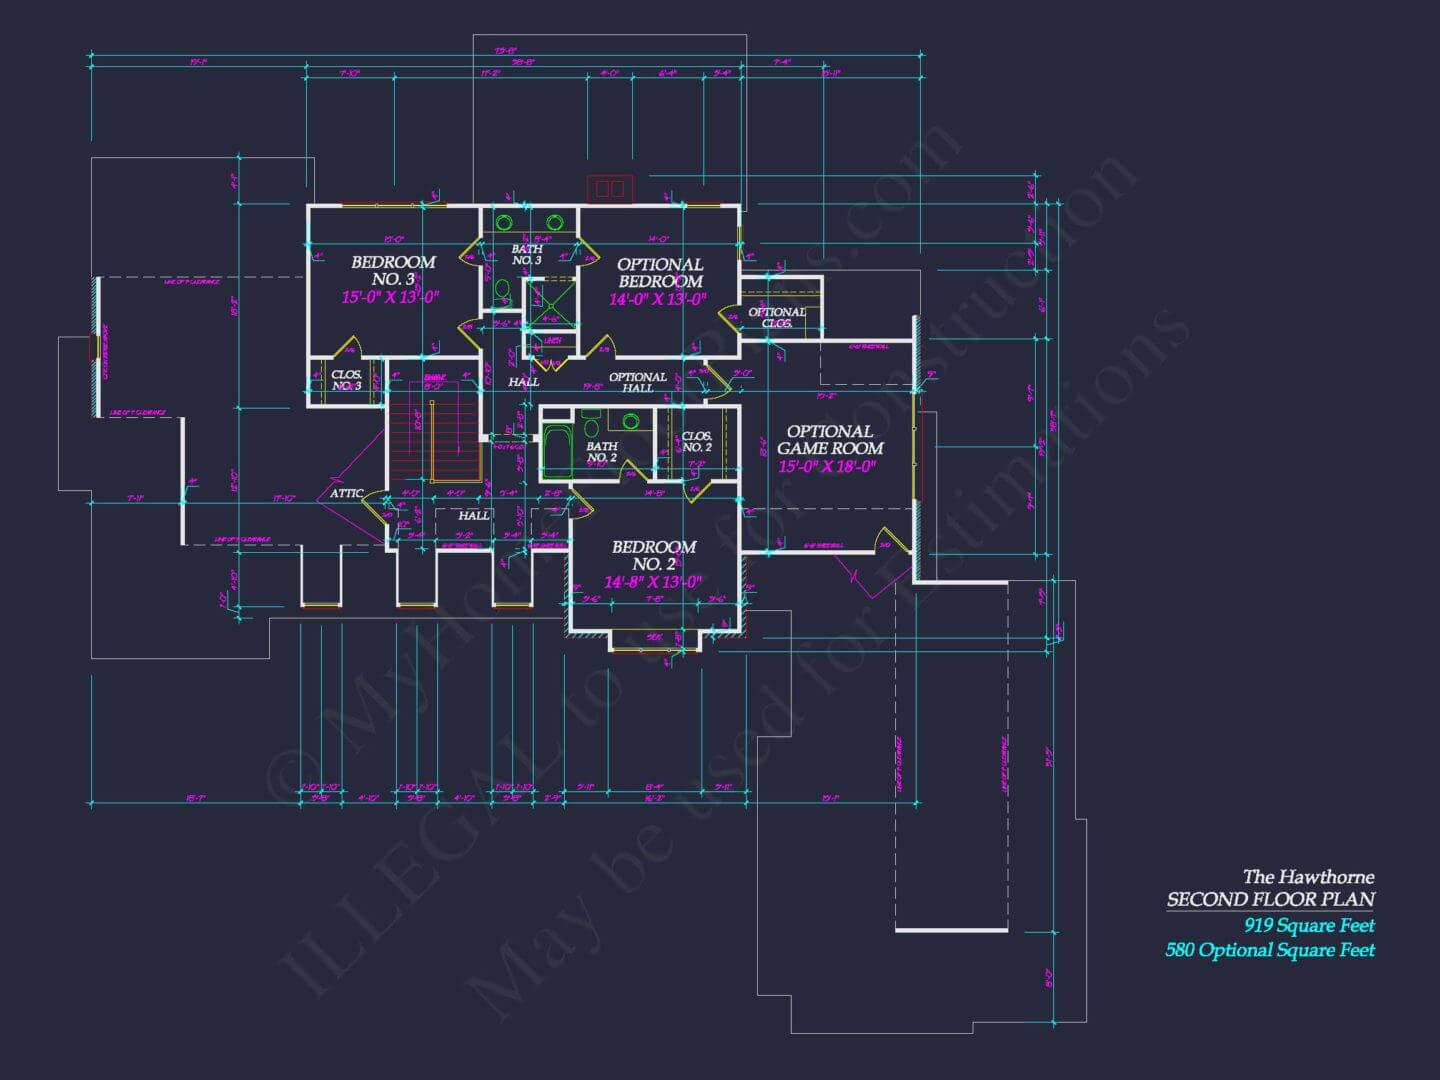 15-2010 my home floor plans_Page_06